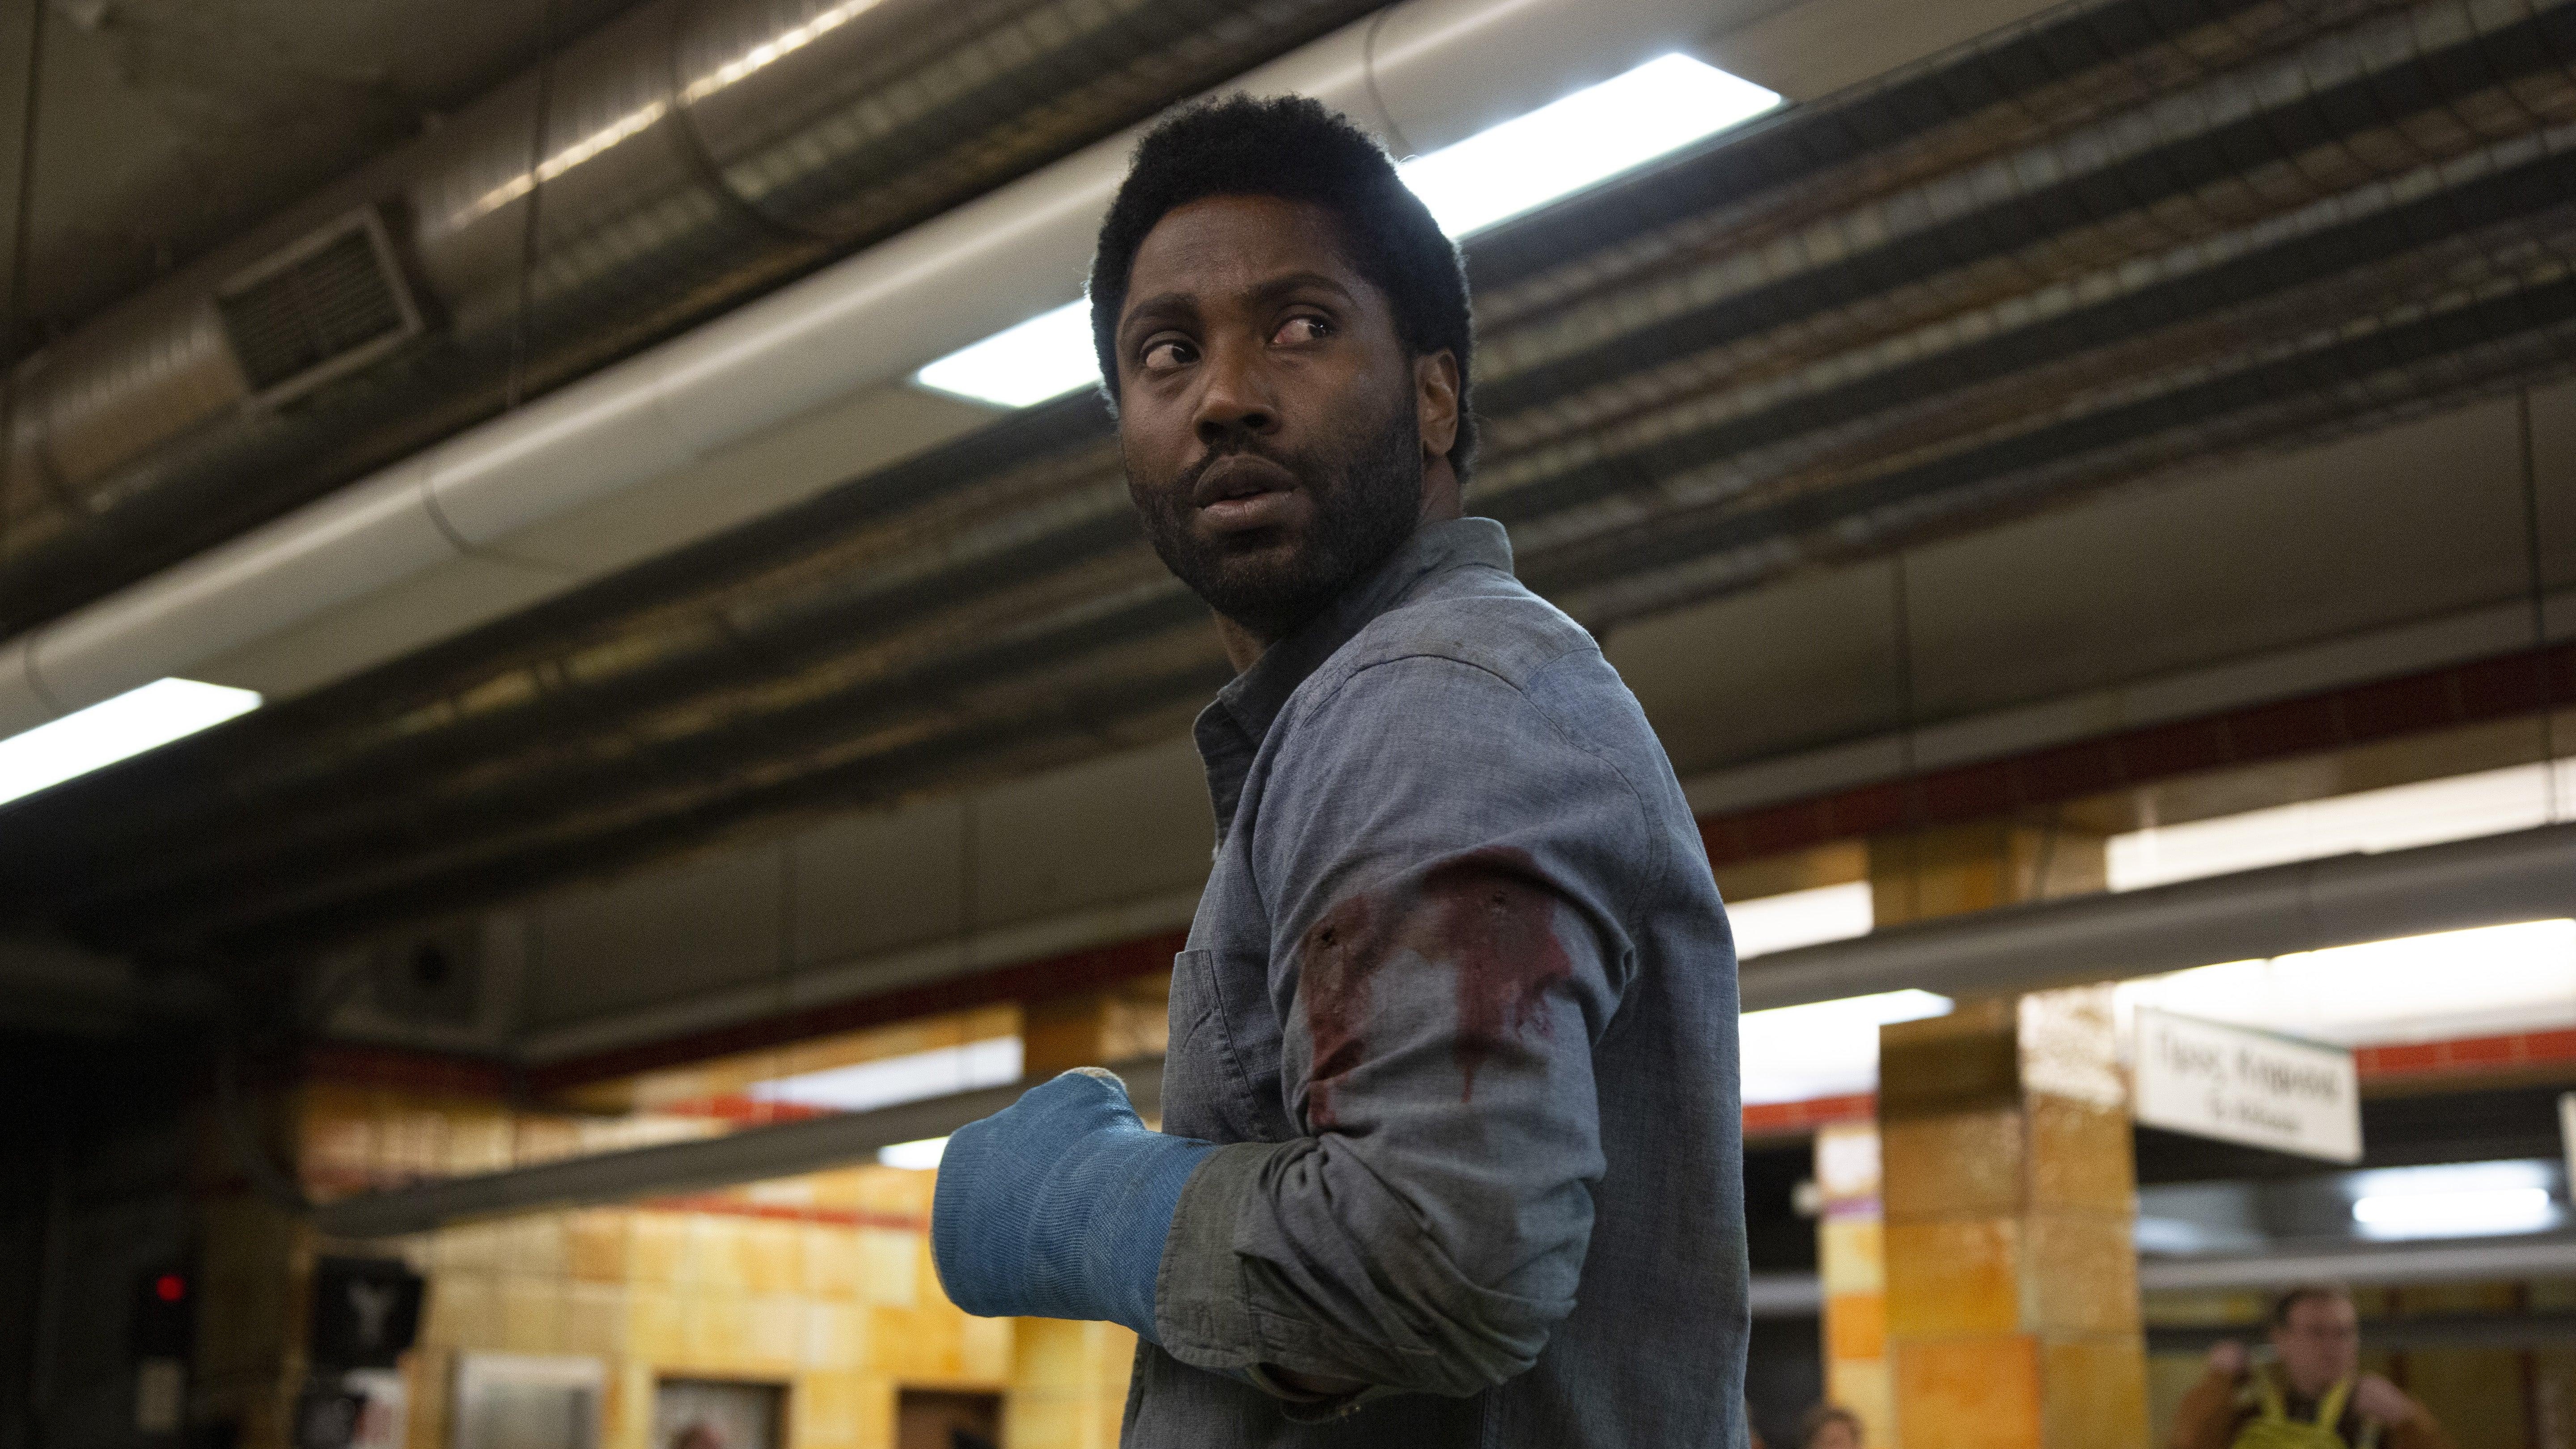 John David Washington gets his own The Fugitive in the forgettable Netflix thriller Beckett